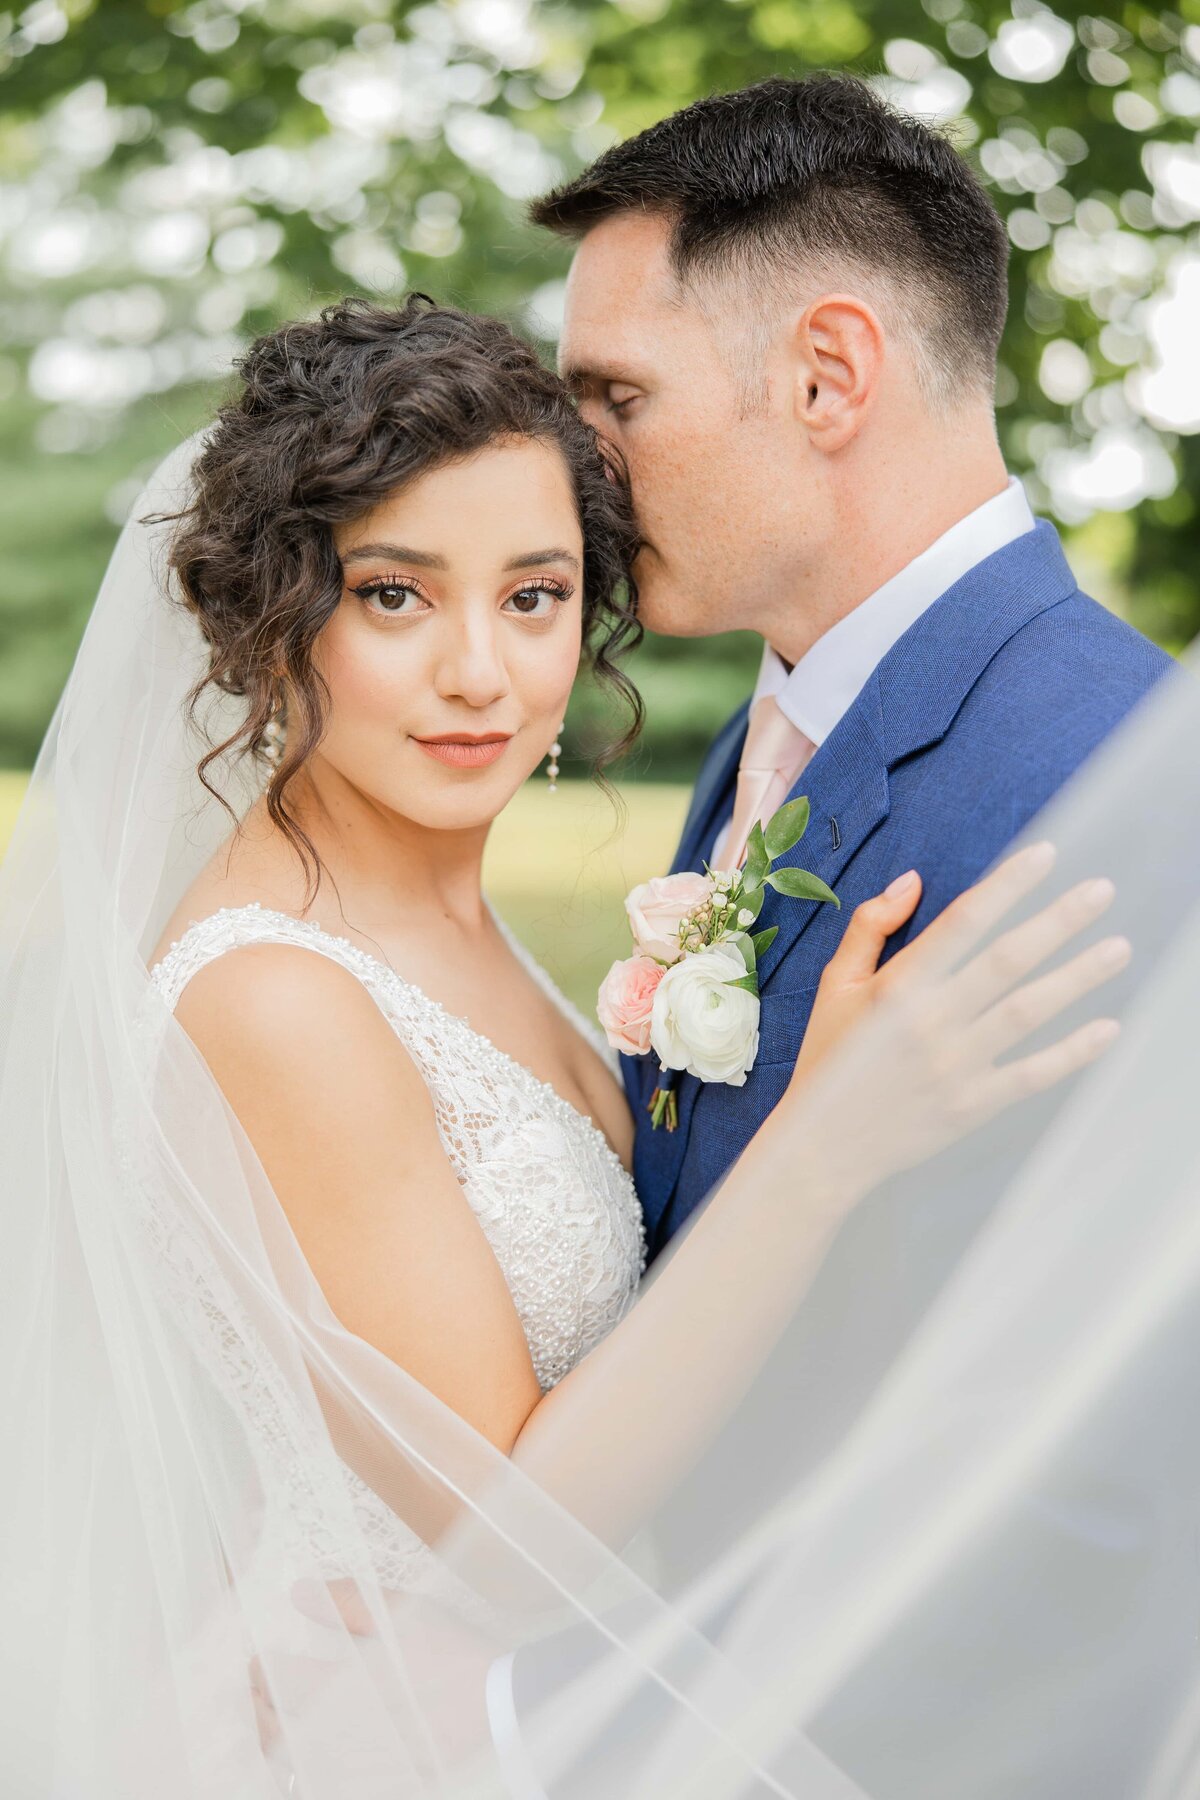 A bride with curly hair and a groom in a blue suit share a tender moment at their wedding in Des Moines, with the bride looking at the camera through her veil.